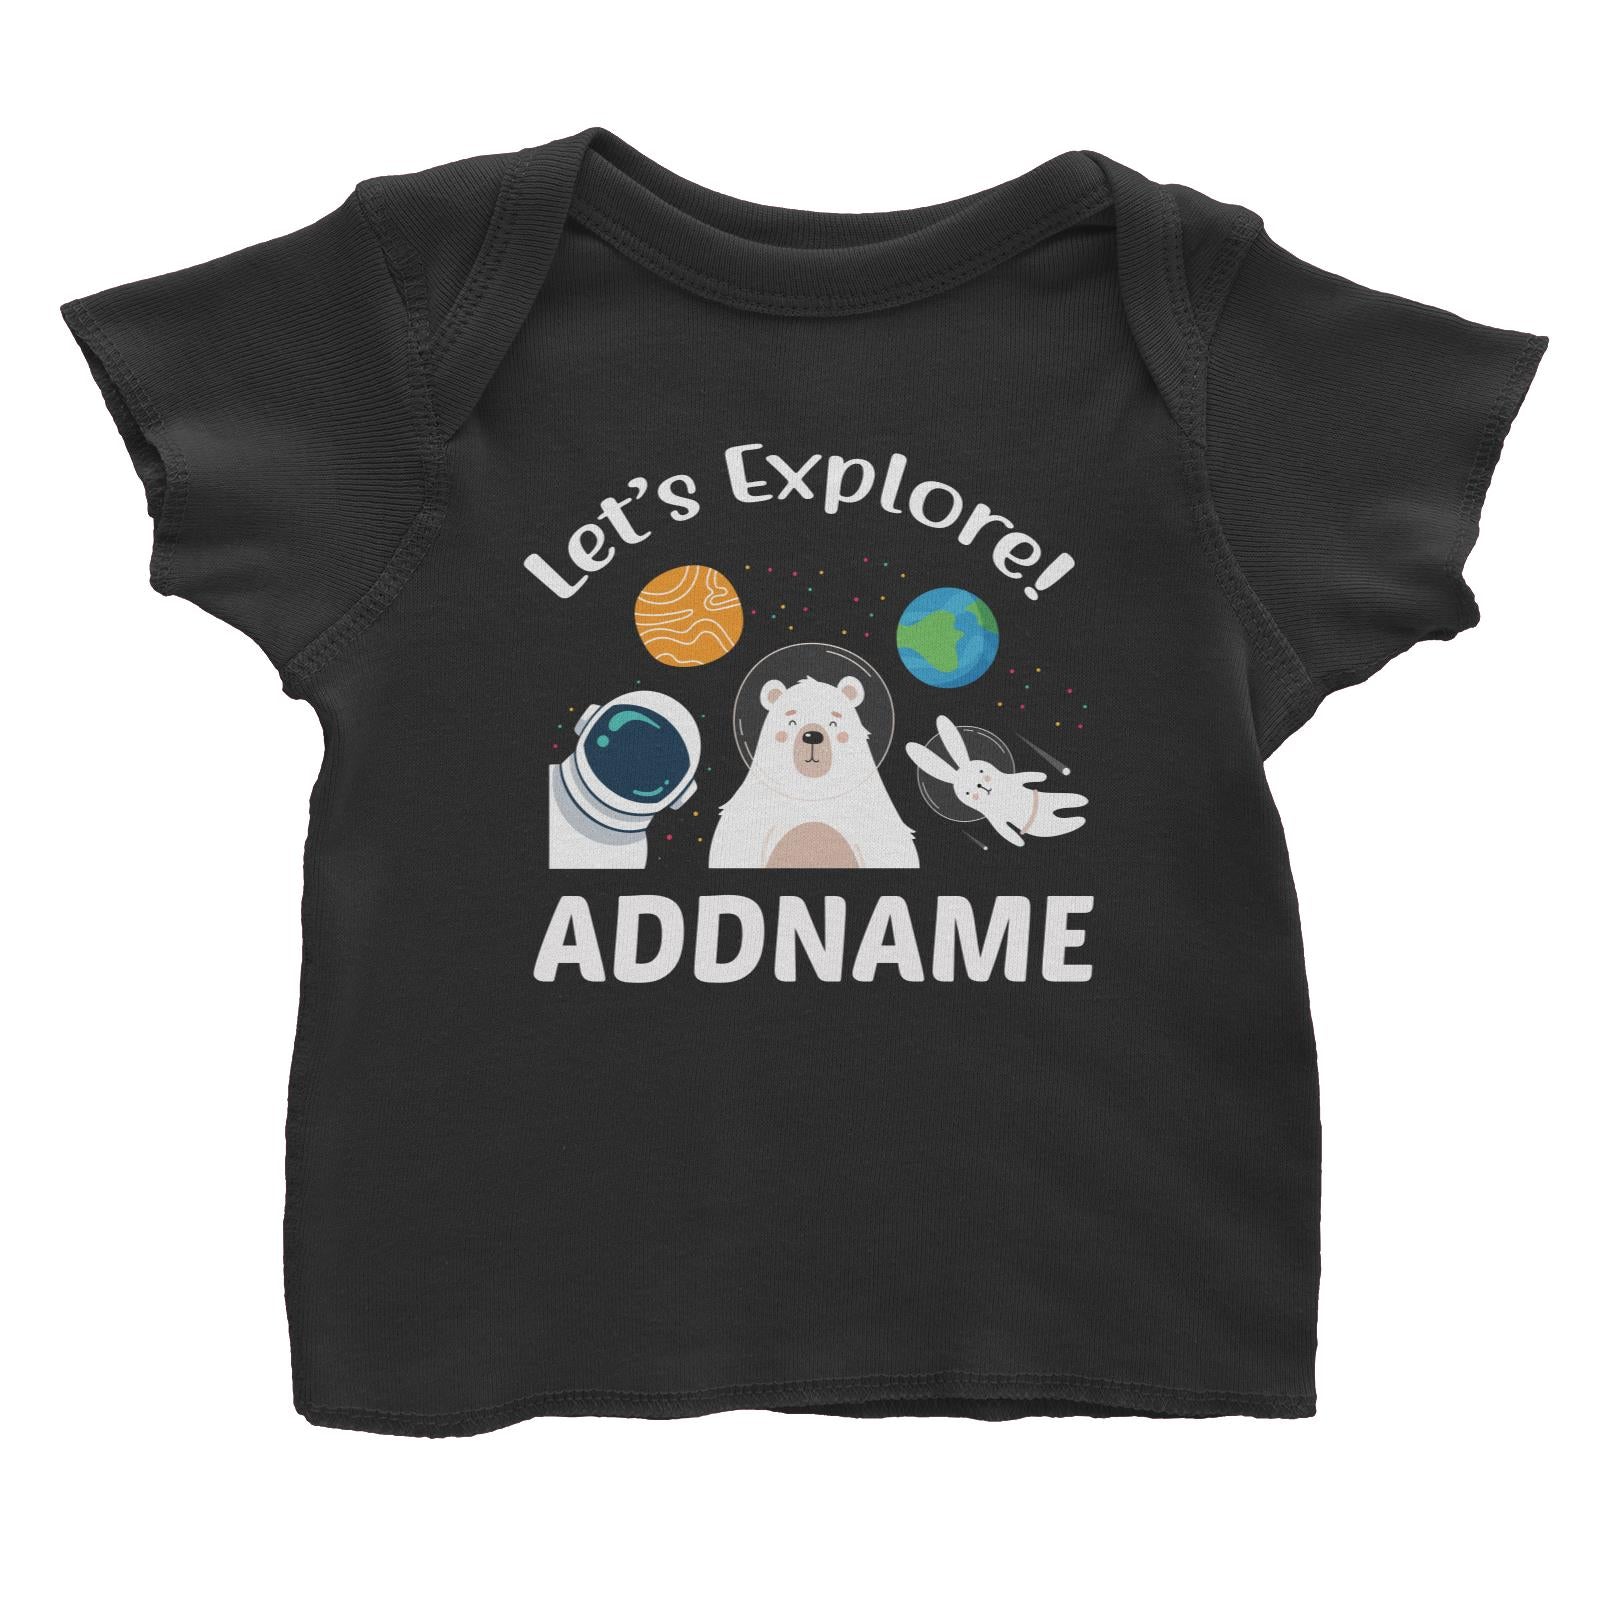 Let's Explore Addname Baby T-Shirt